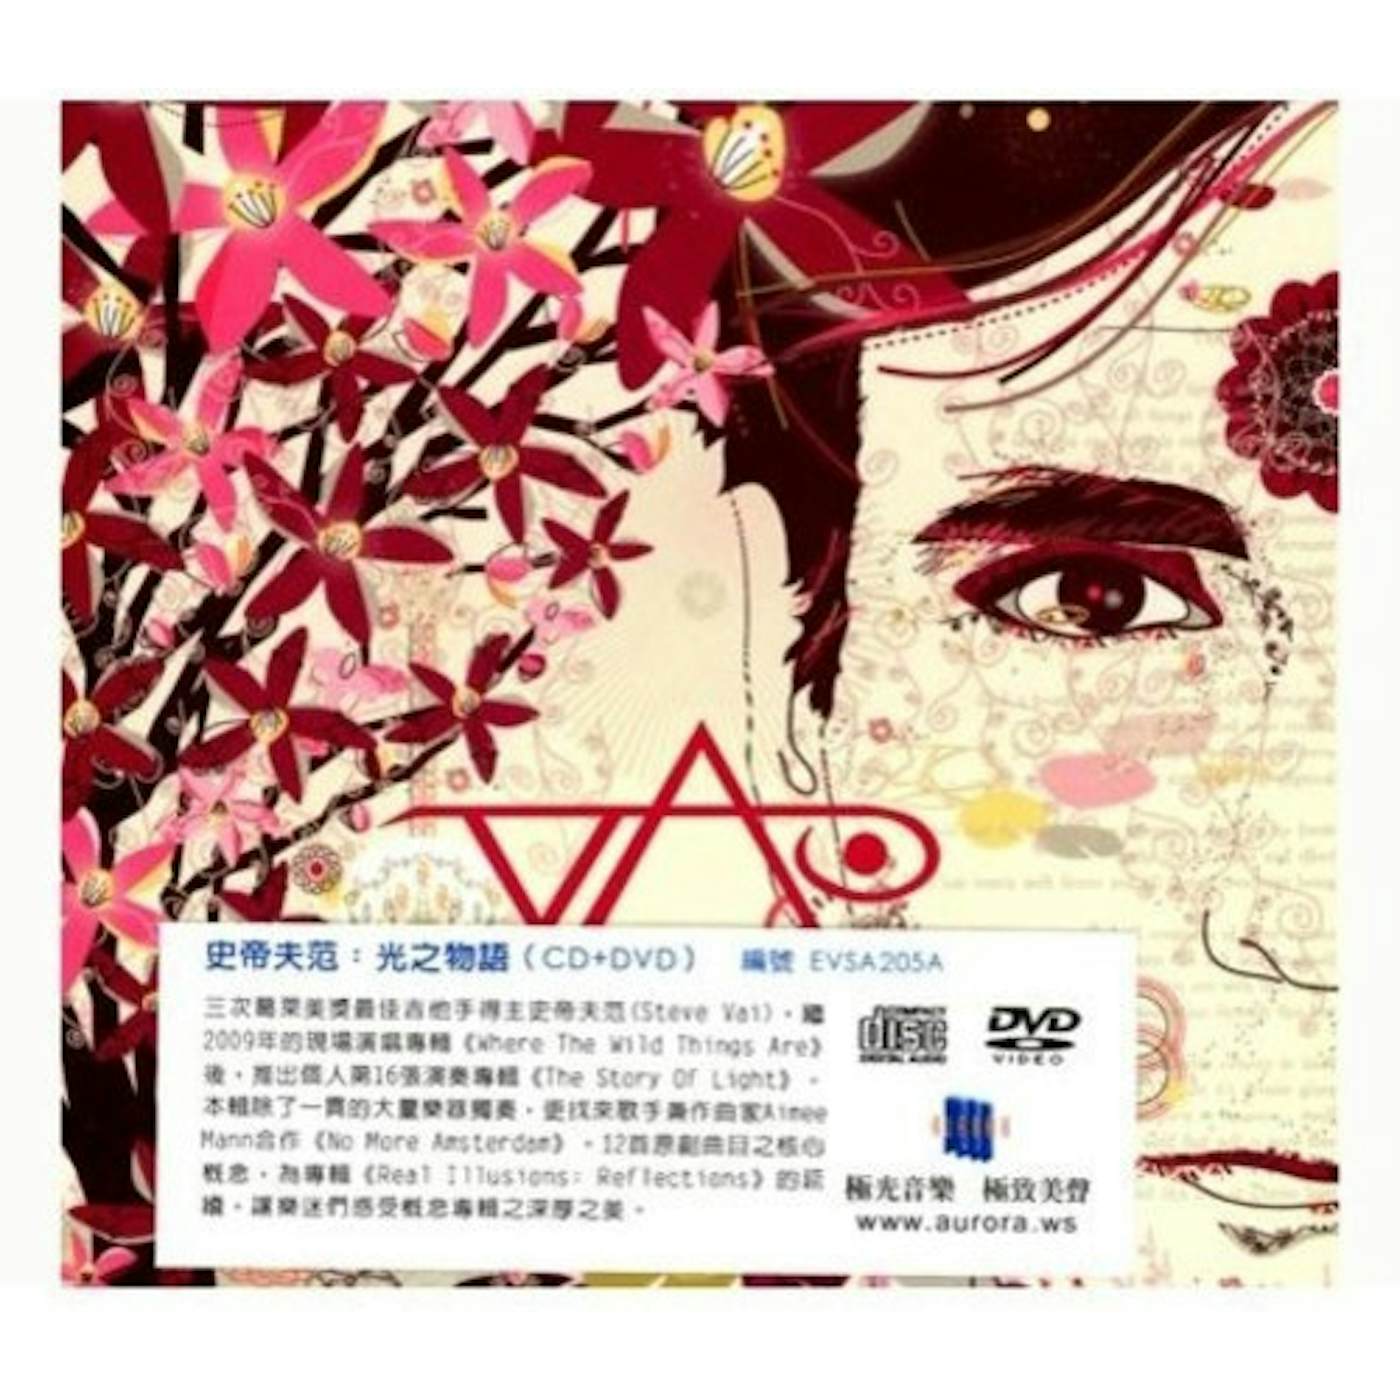 Steve Vai STORY OF LIGHT: REAL ILLUSIONS OF A CD